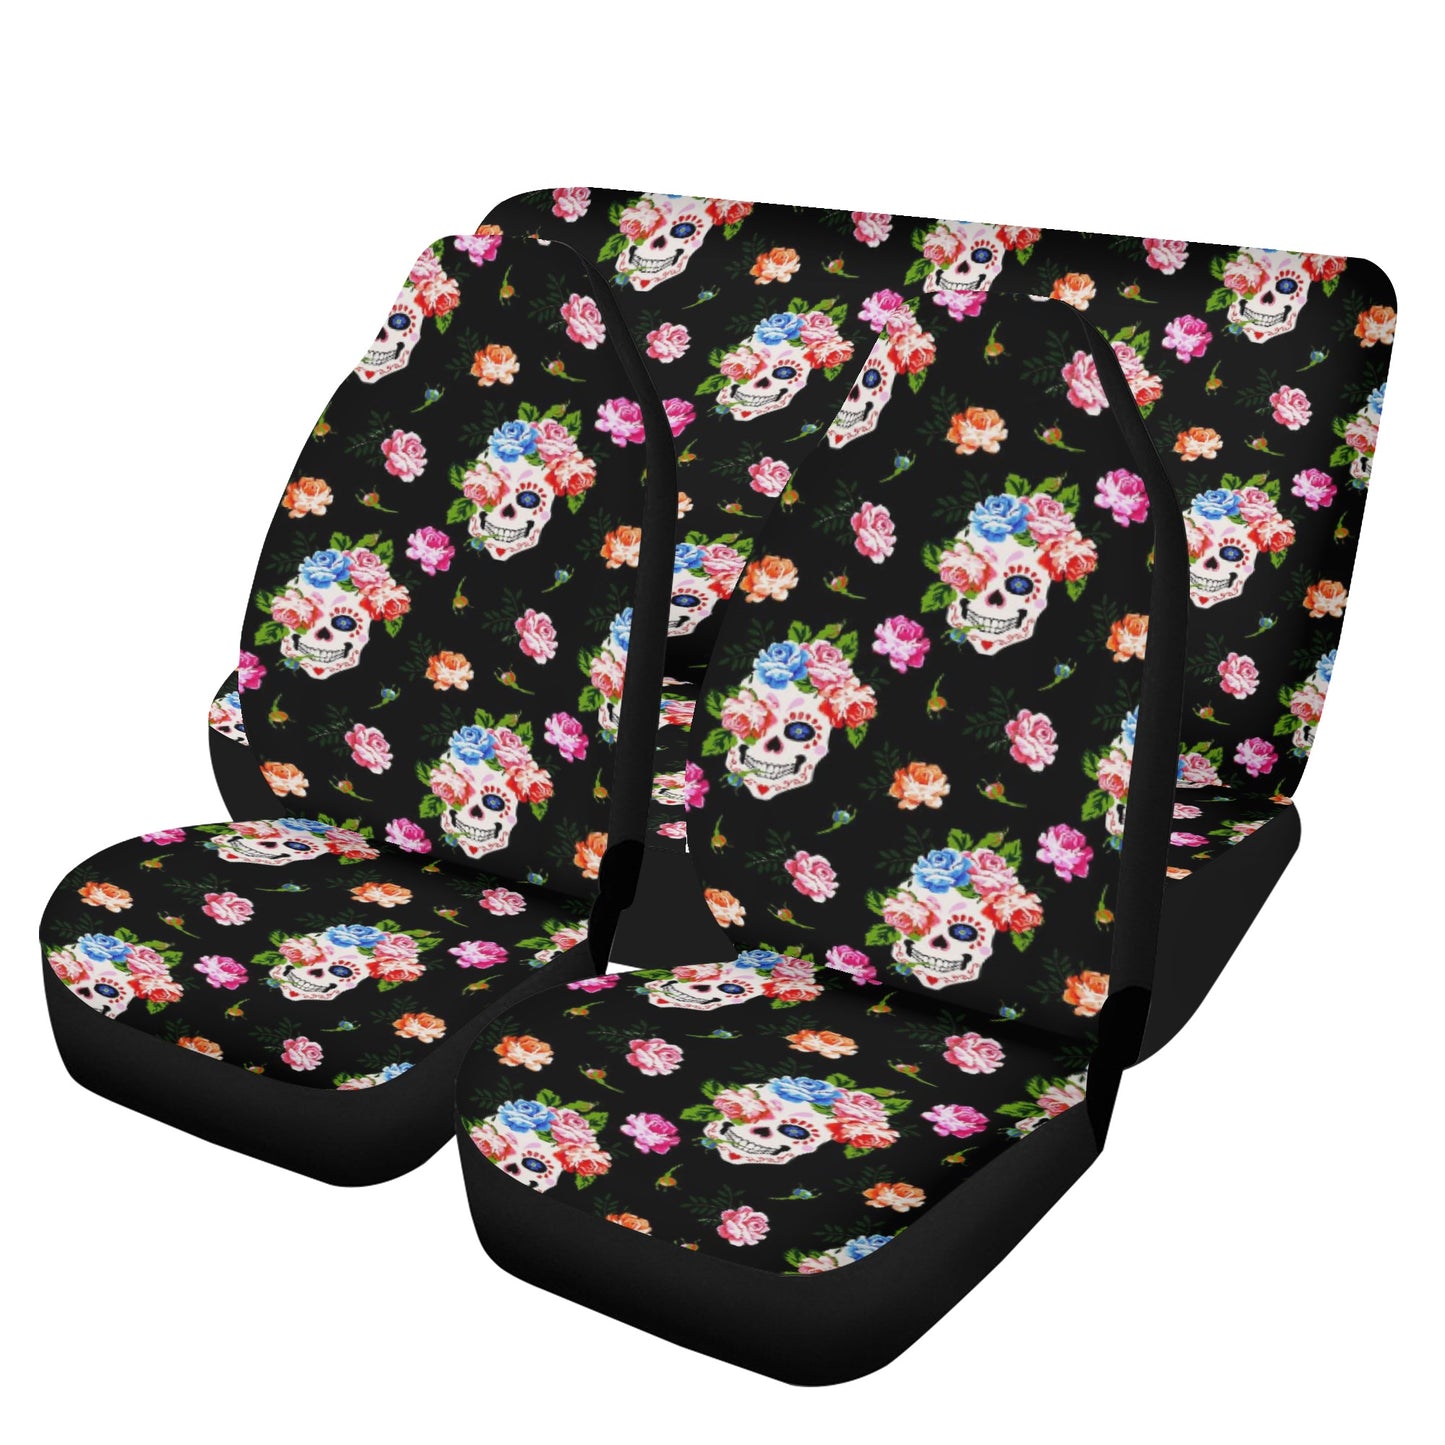 Rose skull rug mat for car, goth car seat , floral skull seat cover for car, evil car seat protector cover, flaming skull cover cushion acce